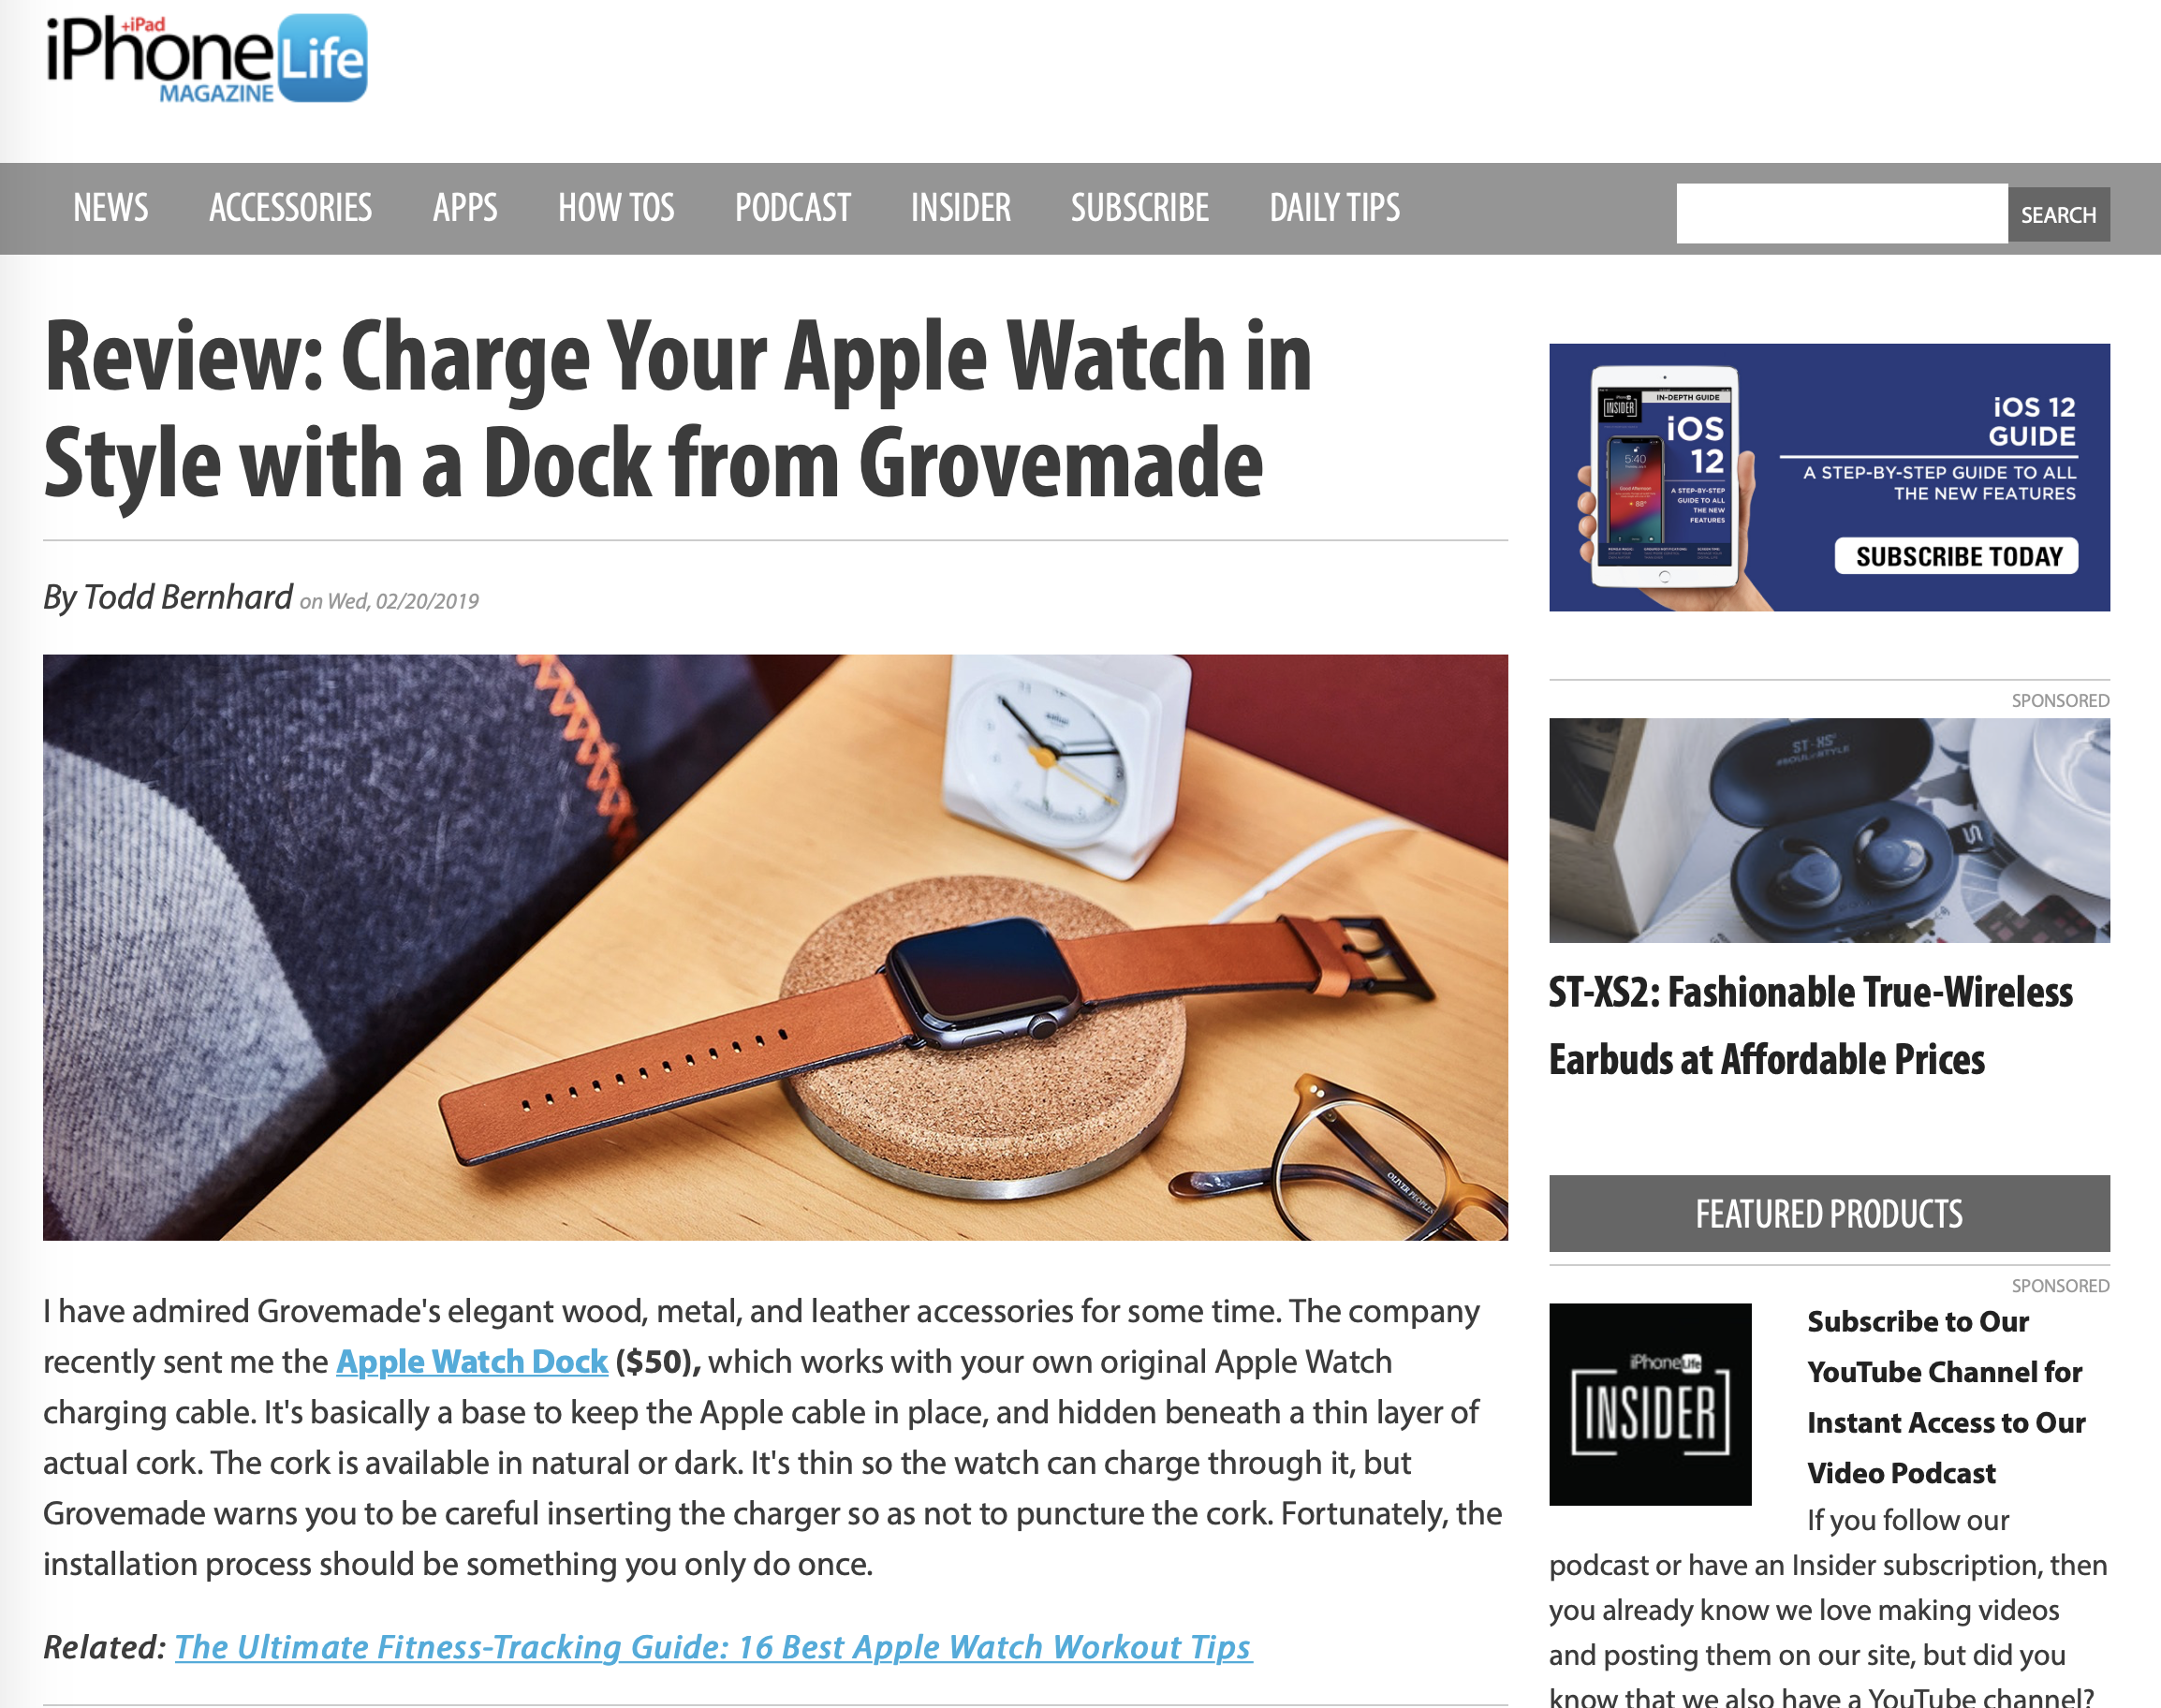 iPhone life features grovemade charger pad